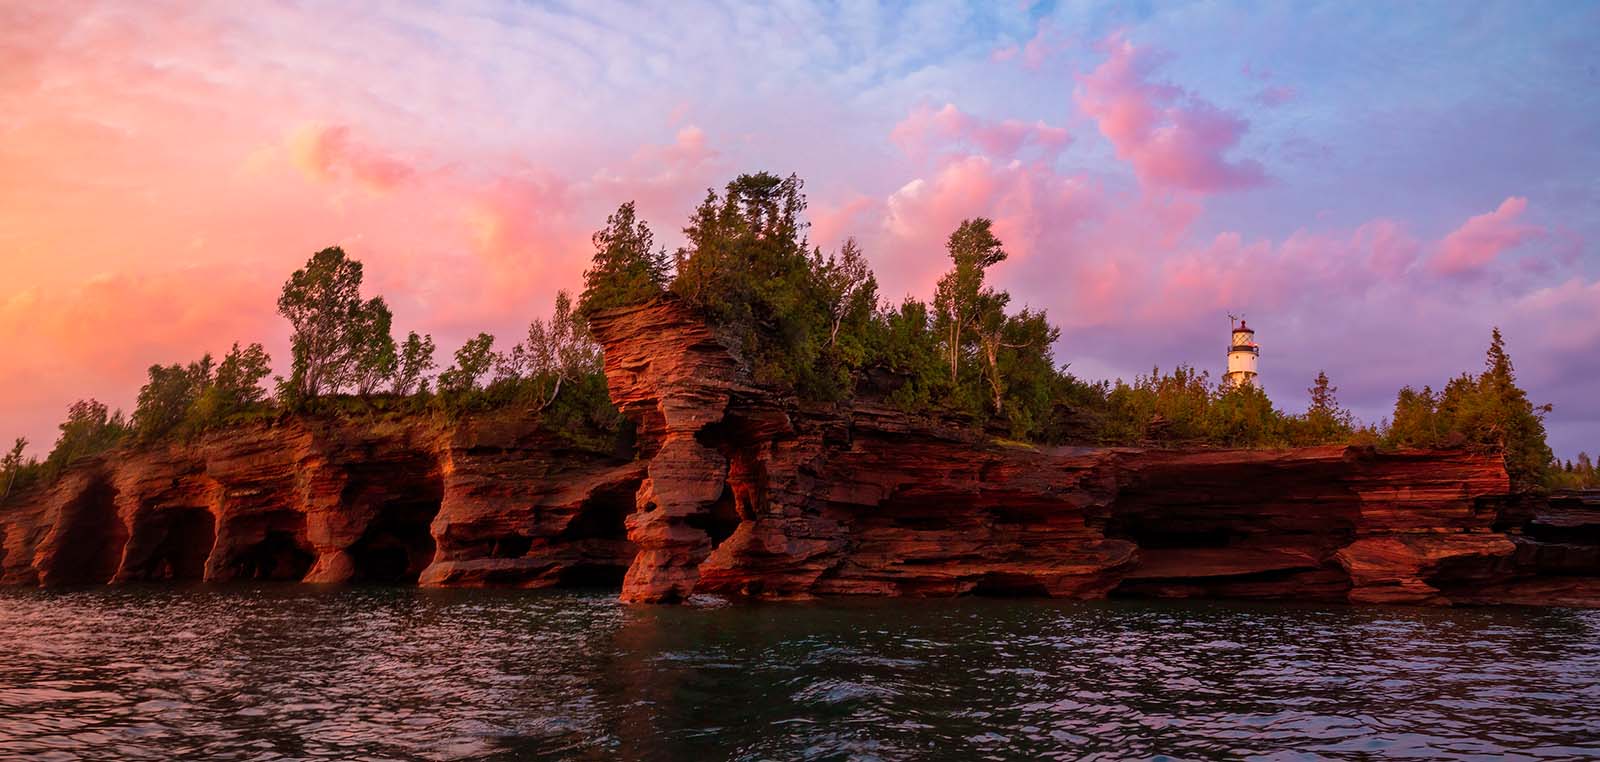 devil's island lighthouse in the apostle islands national lakeshore